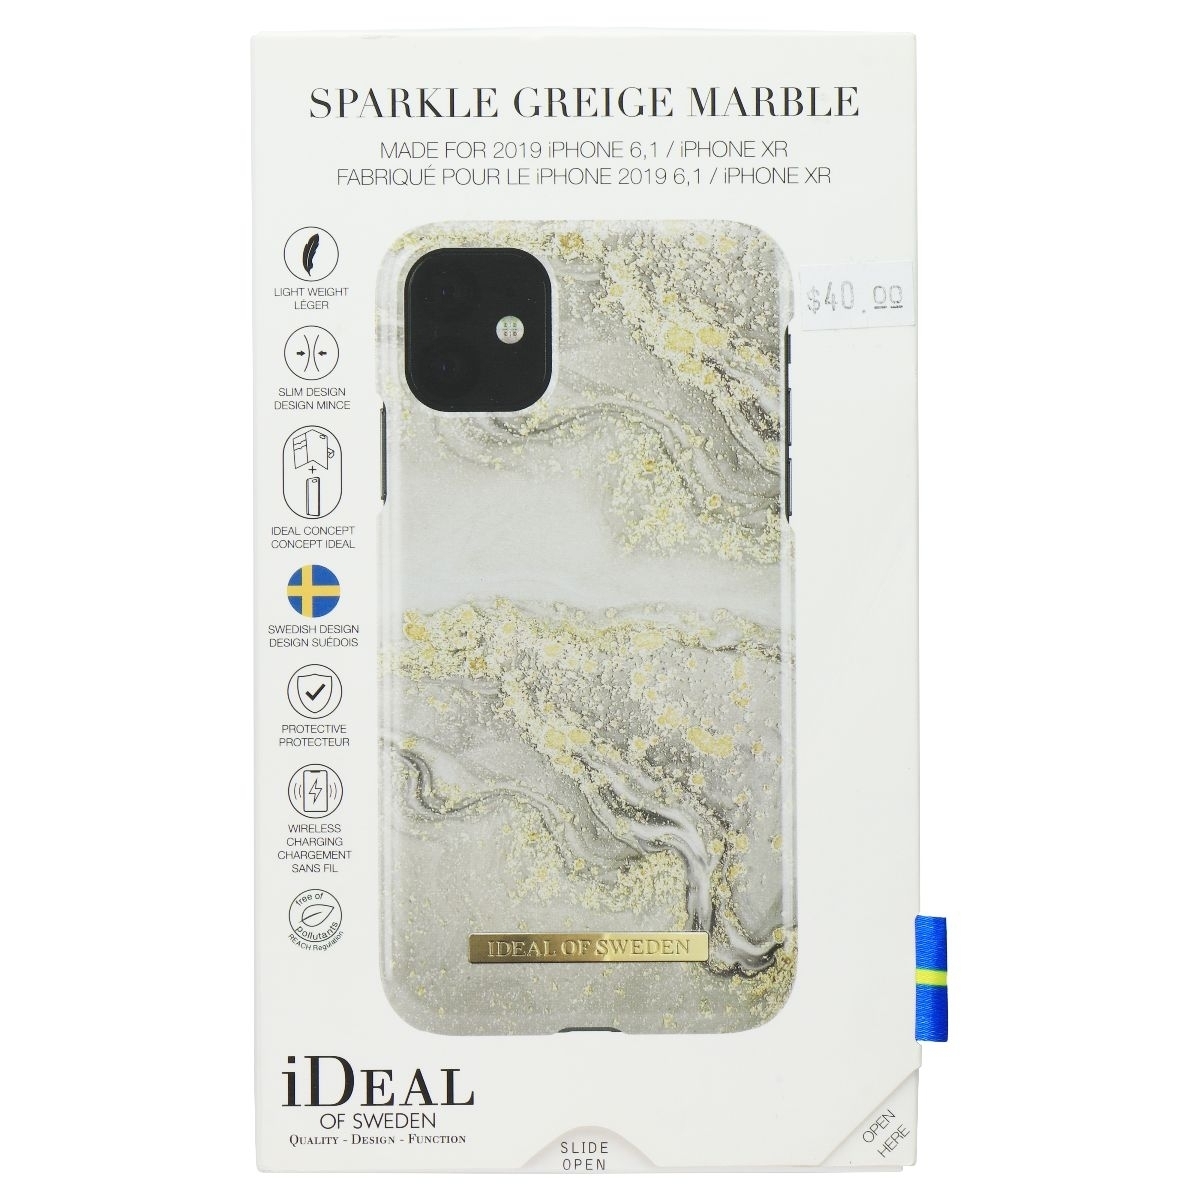 IDeal Of Sweden Printed Hard Case For IPhone 11 And XR - Sparkle Greige Marble (Refurbished)